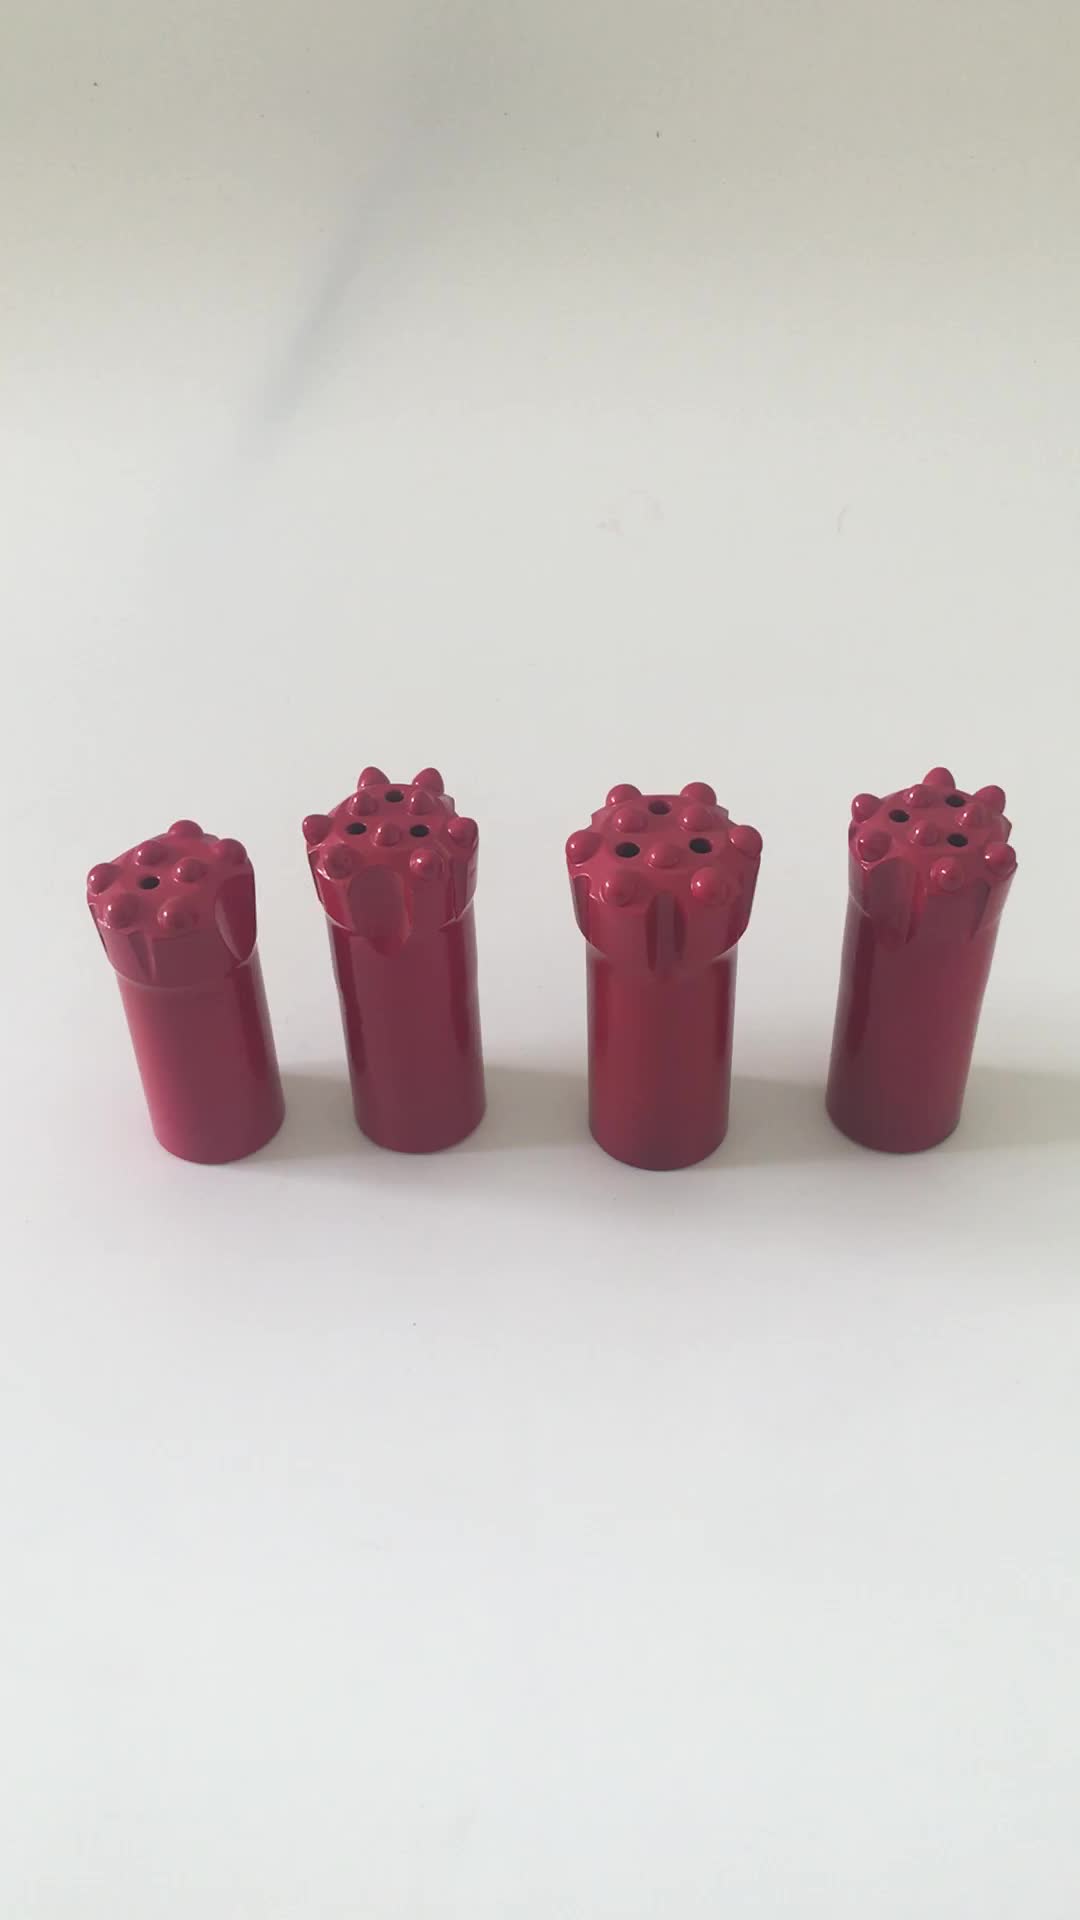 T38 T45 T51 Thread button bits for rock drill